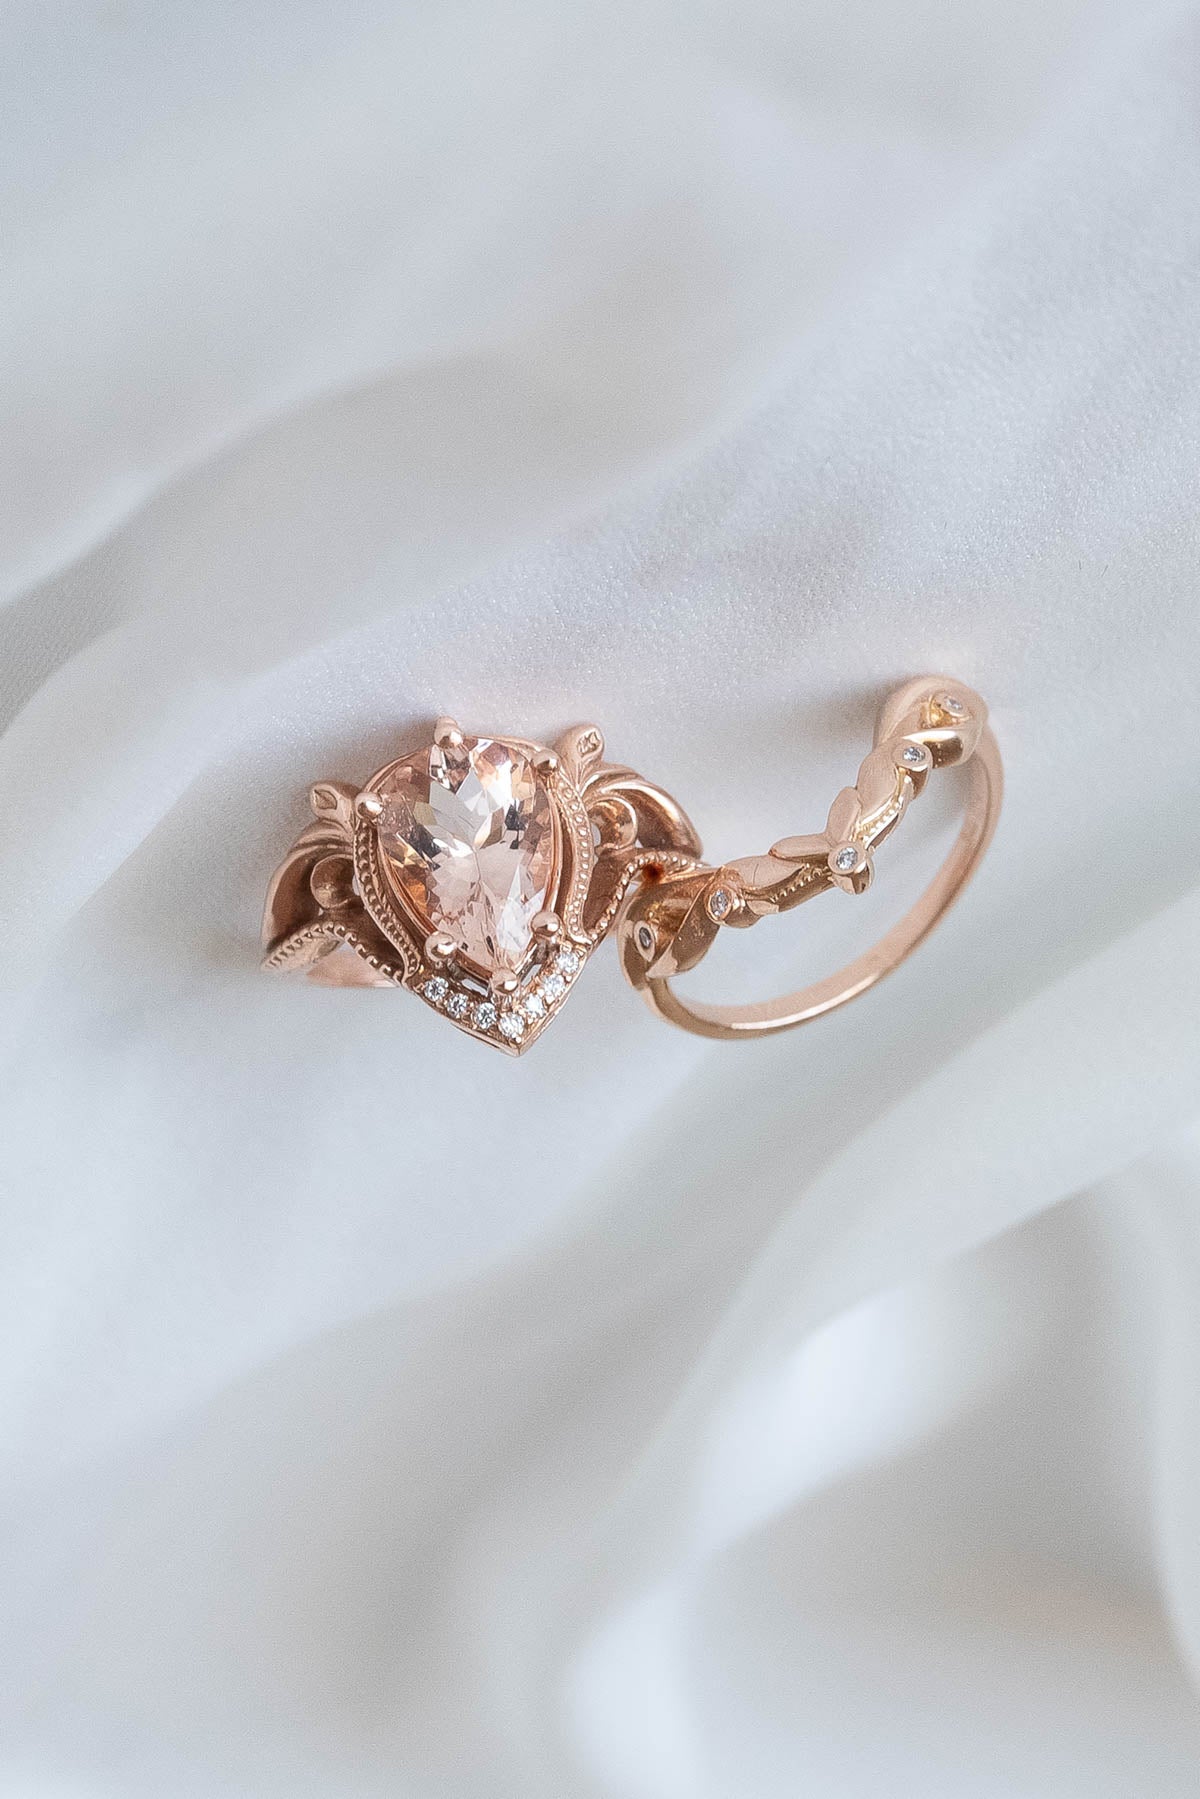 READY TO SHIP: Lida ring set in 14K rose gold, peach morganite 10x7 mm, moissanites, RING SIZE 5.5 US - Eden Garden Jewelry™